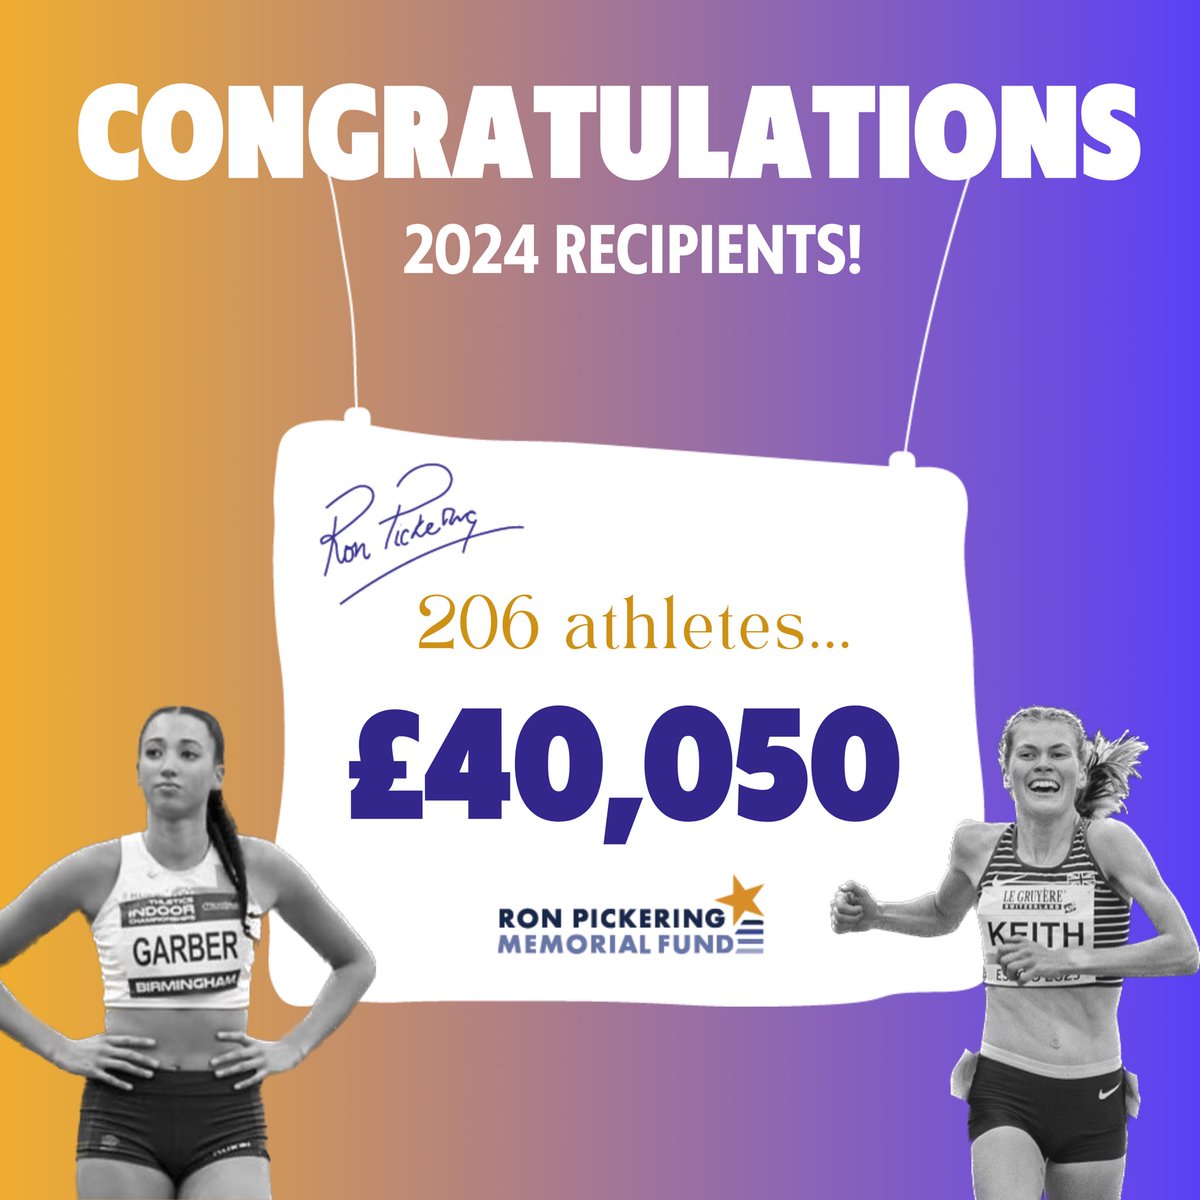 CONGRATULATIONS to all our 2024 recipients, it is our pleasure to be able to support you this season. This year we have given out a record number of 206 grants which would not have been possible without the phenomenal efforts of our ‘Ronners’ and RPMF trustees.